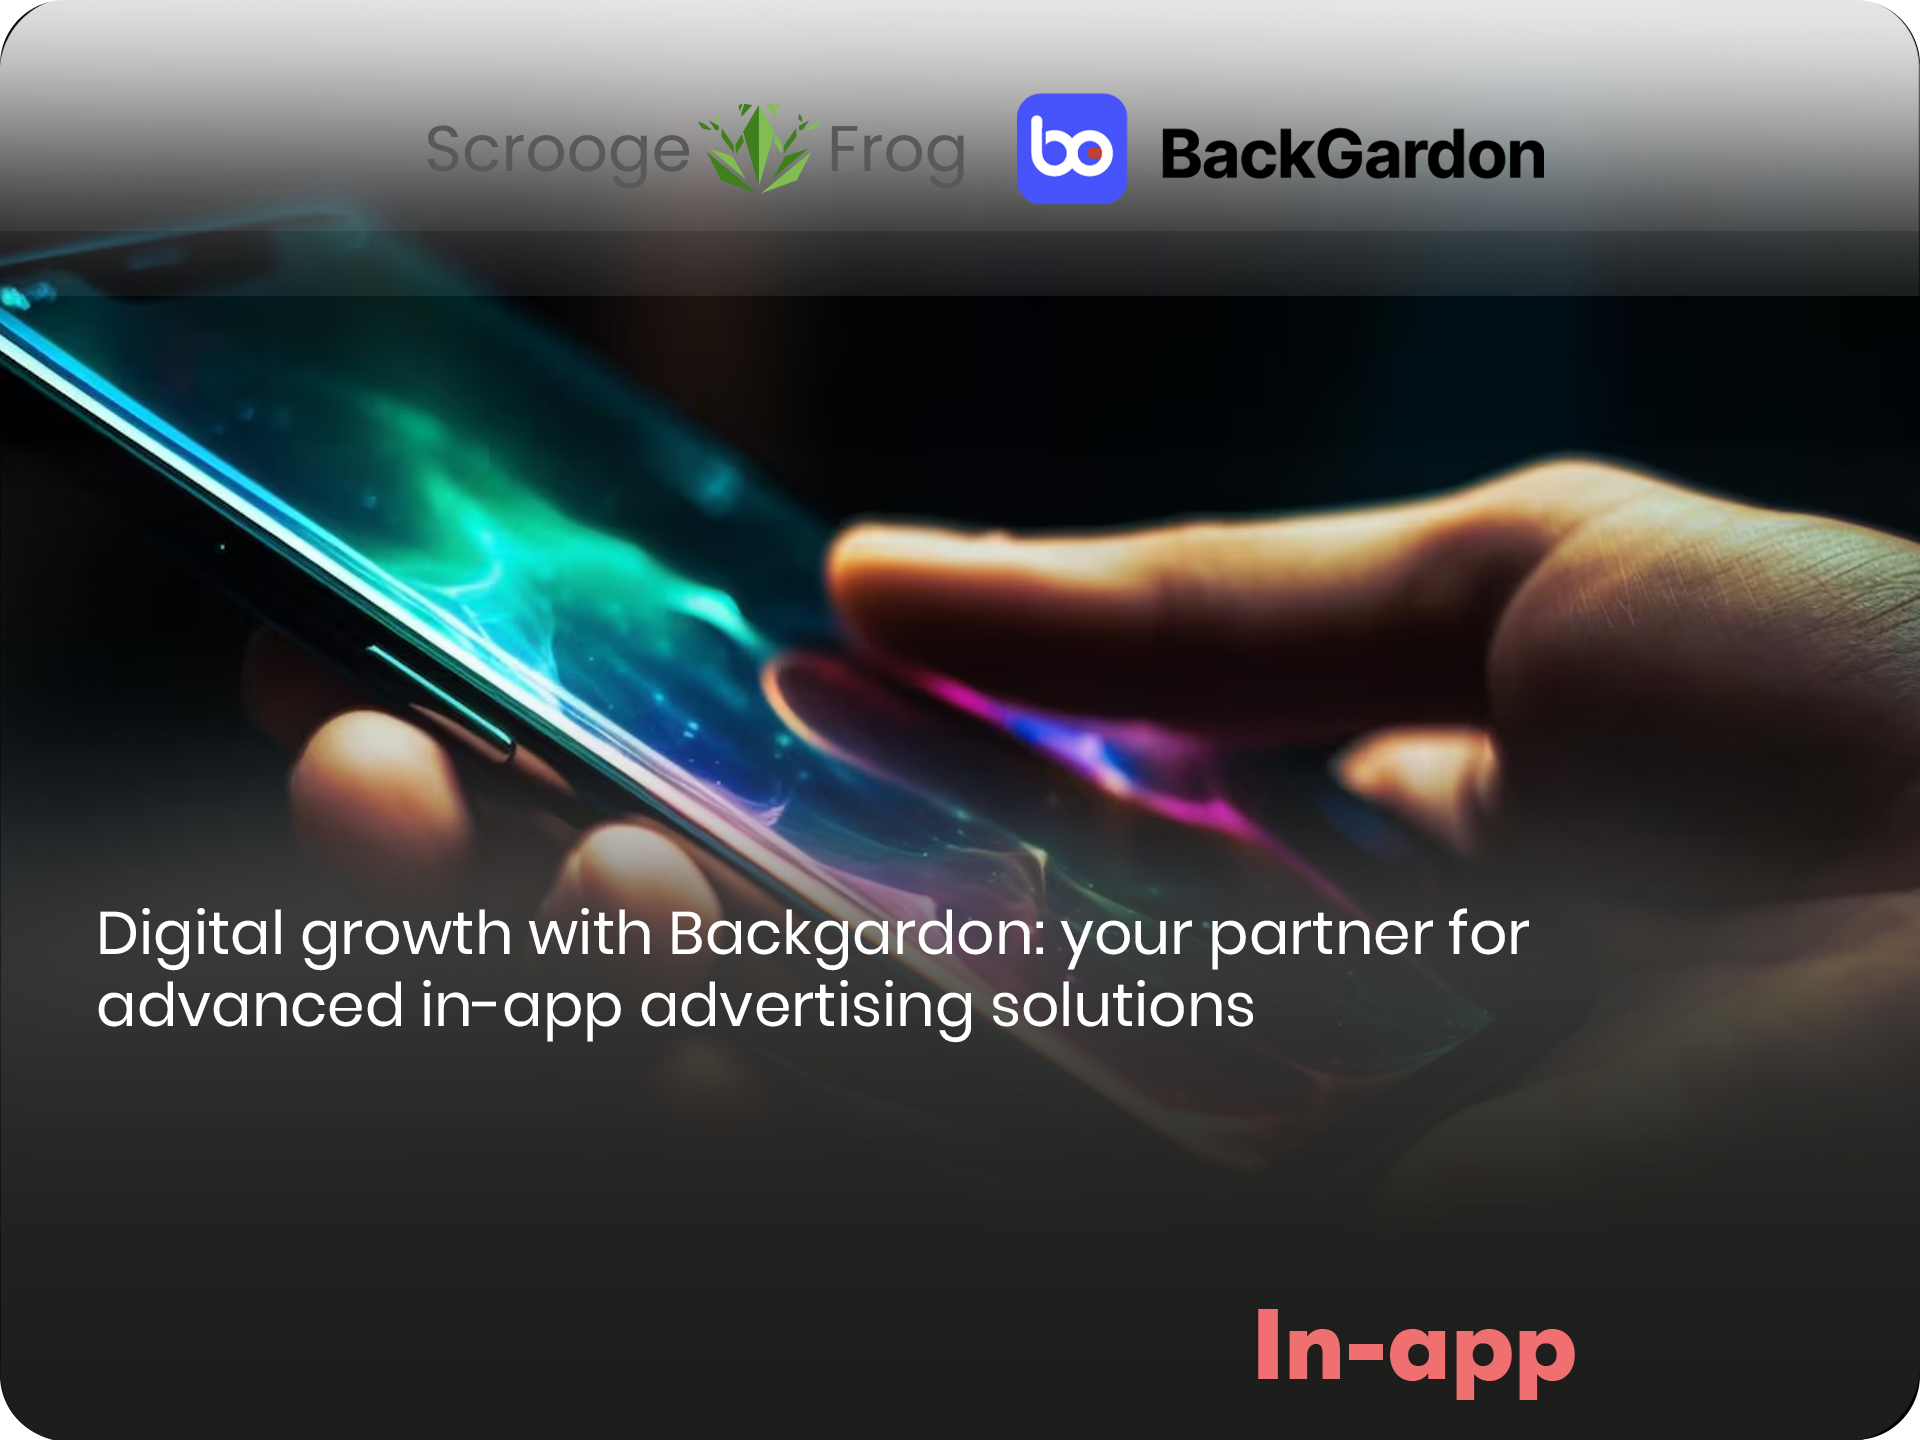 Digital growth with Backgardon: your partner for advanced in-app advertising solutions